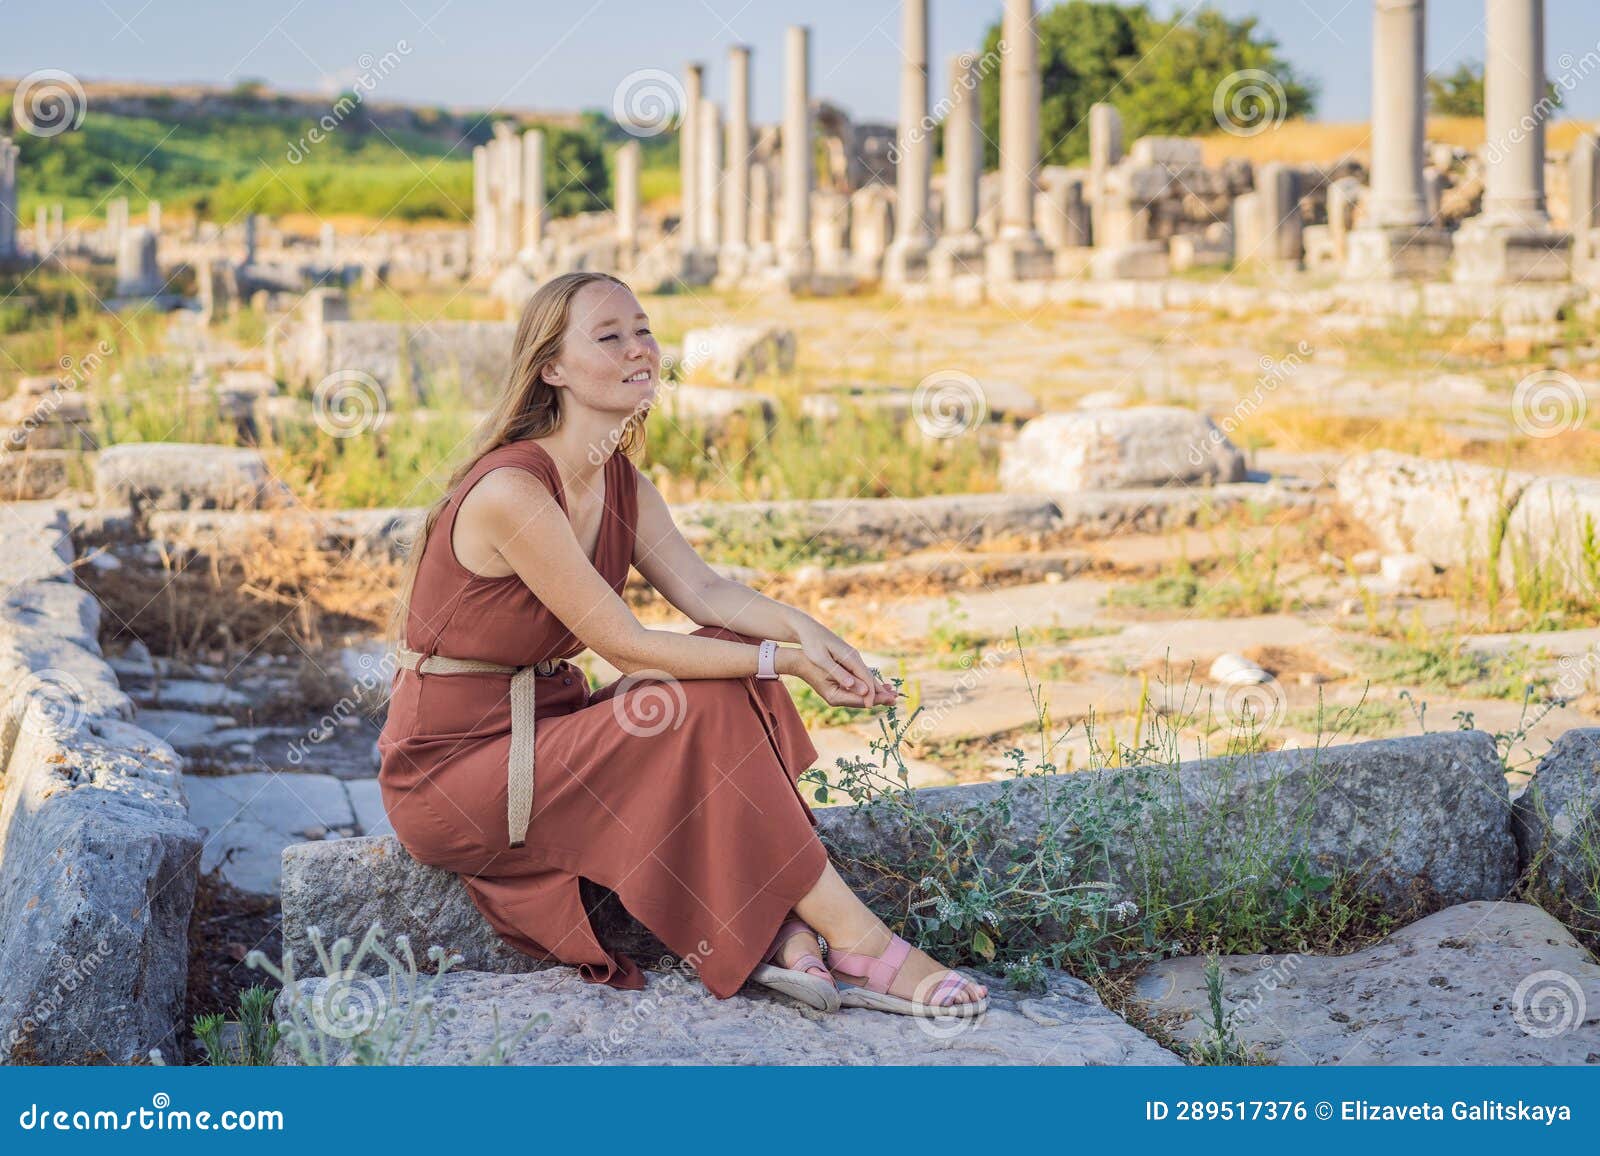 pretty tourist woman at the ruins of ancient city of perge near antalya turkey